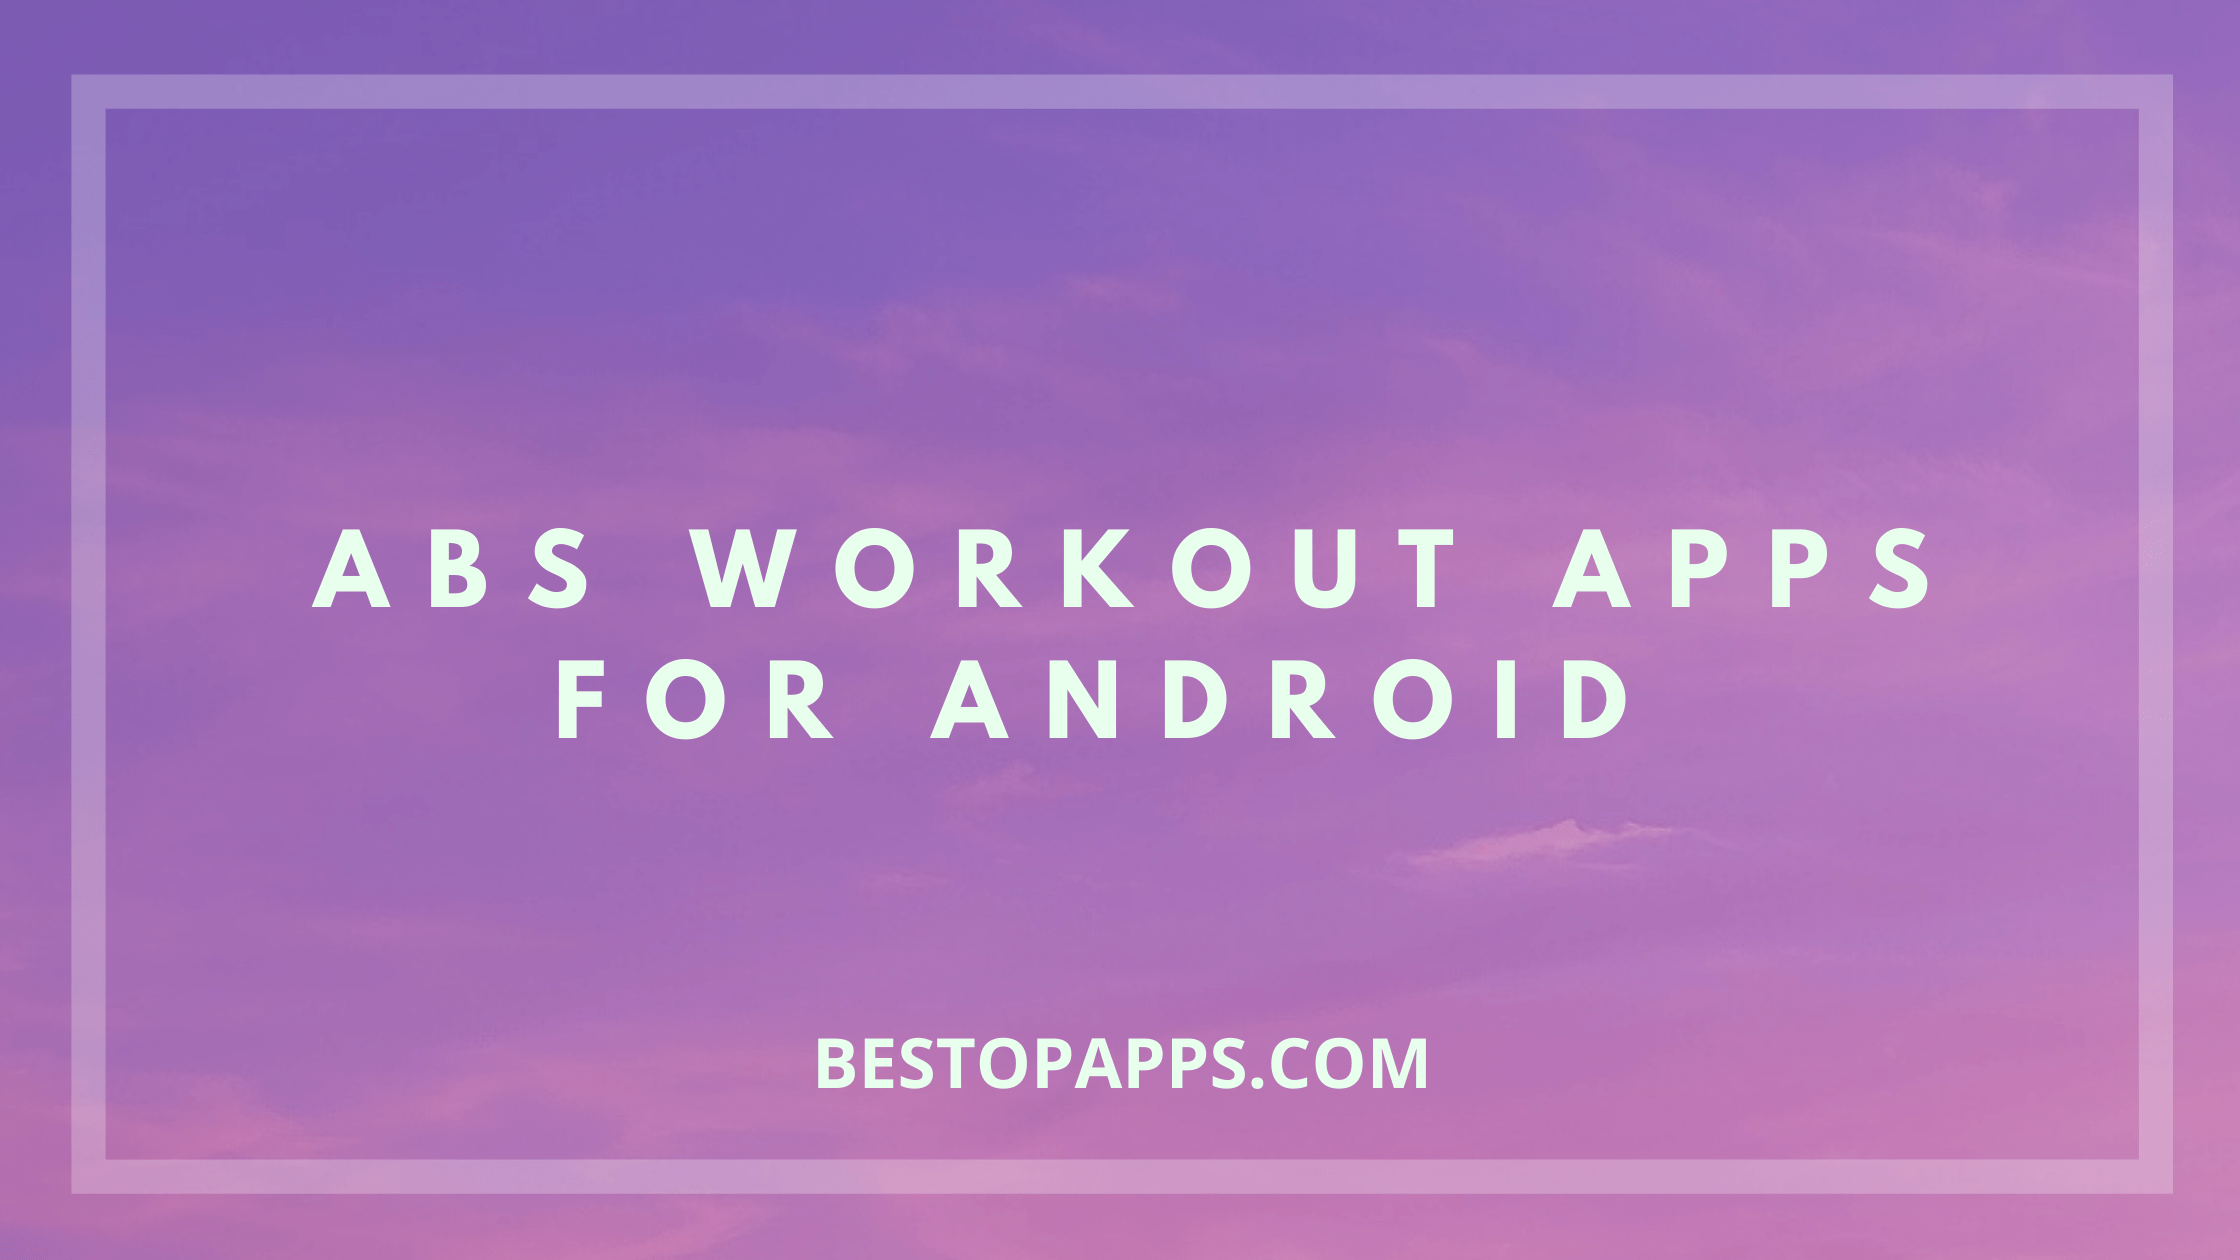 Abs Workout Apps for Android